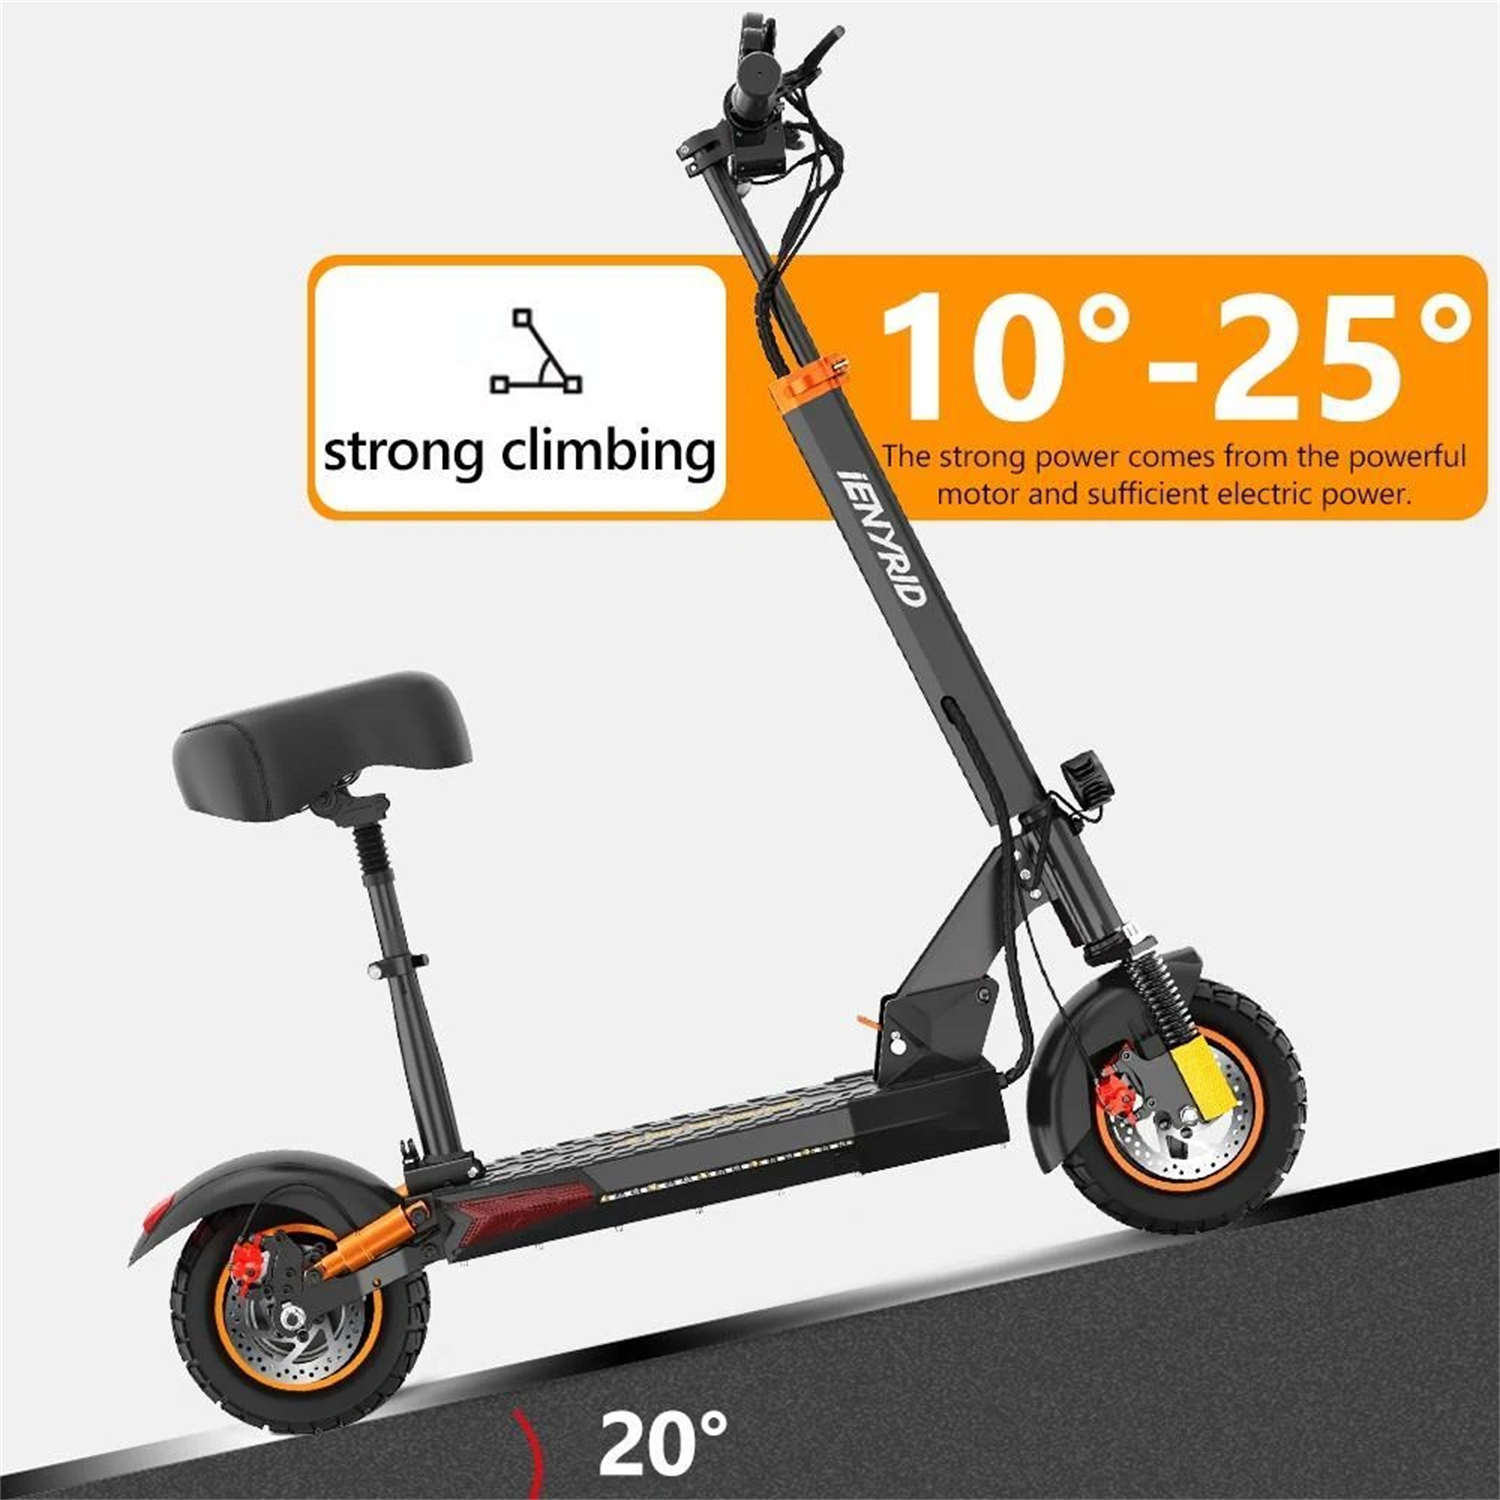 iENYRID M4 Pro S+ Off Road Electric Scooter 10 Inch Tires 800W Motor 48V 10Ah Battery for 15.5-22 miles Mileage 330 lbs Load with Seat